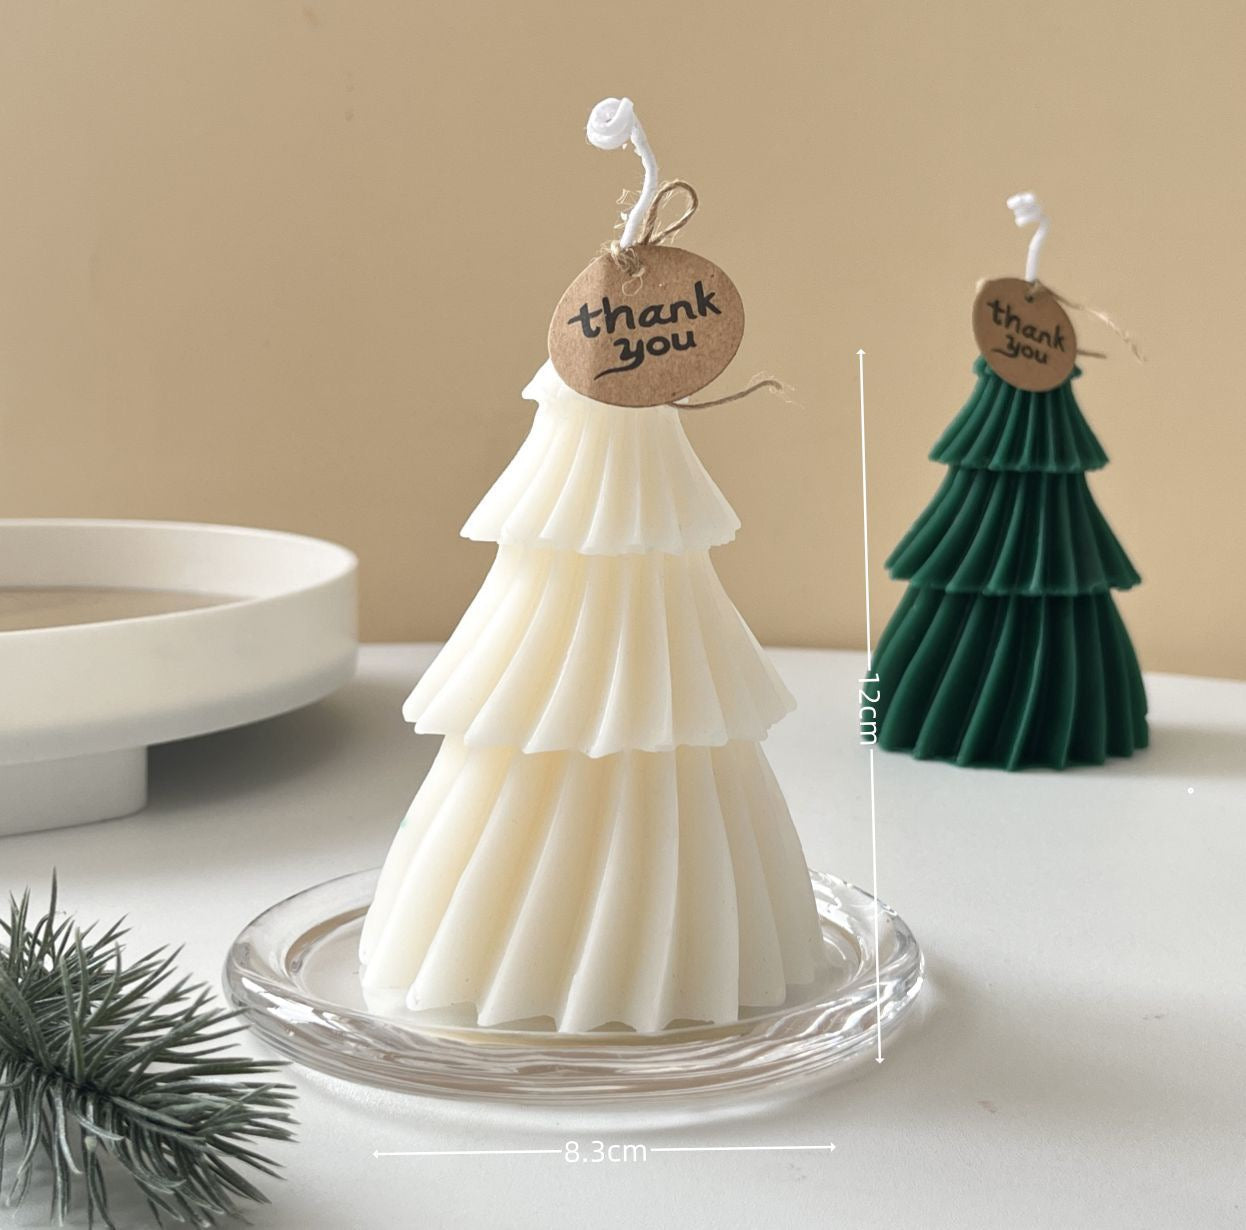 【Ahhkawaii】Christmas Candle Aromatherapy Birthday Party Centerpiece Gift Decoration